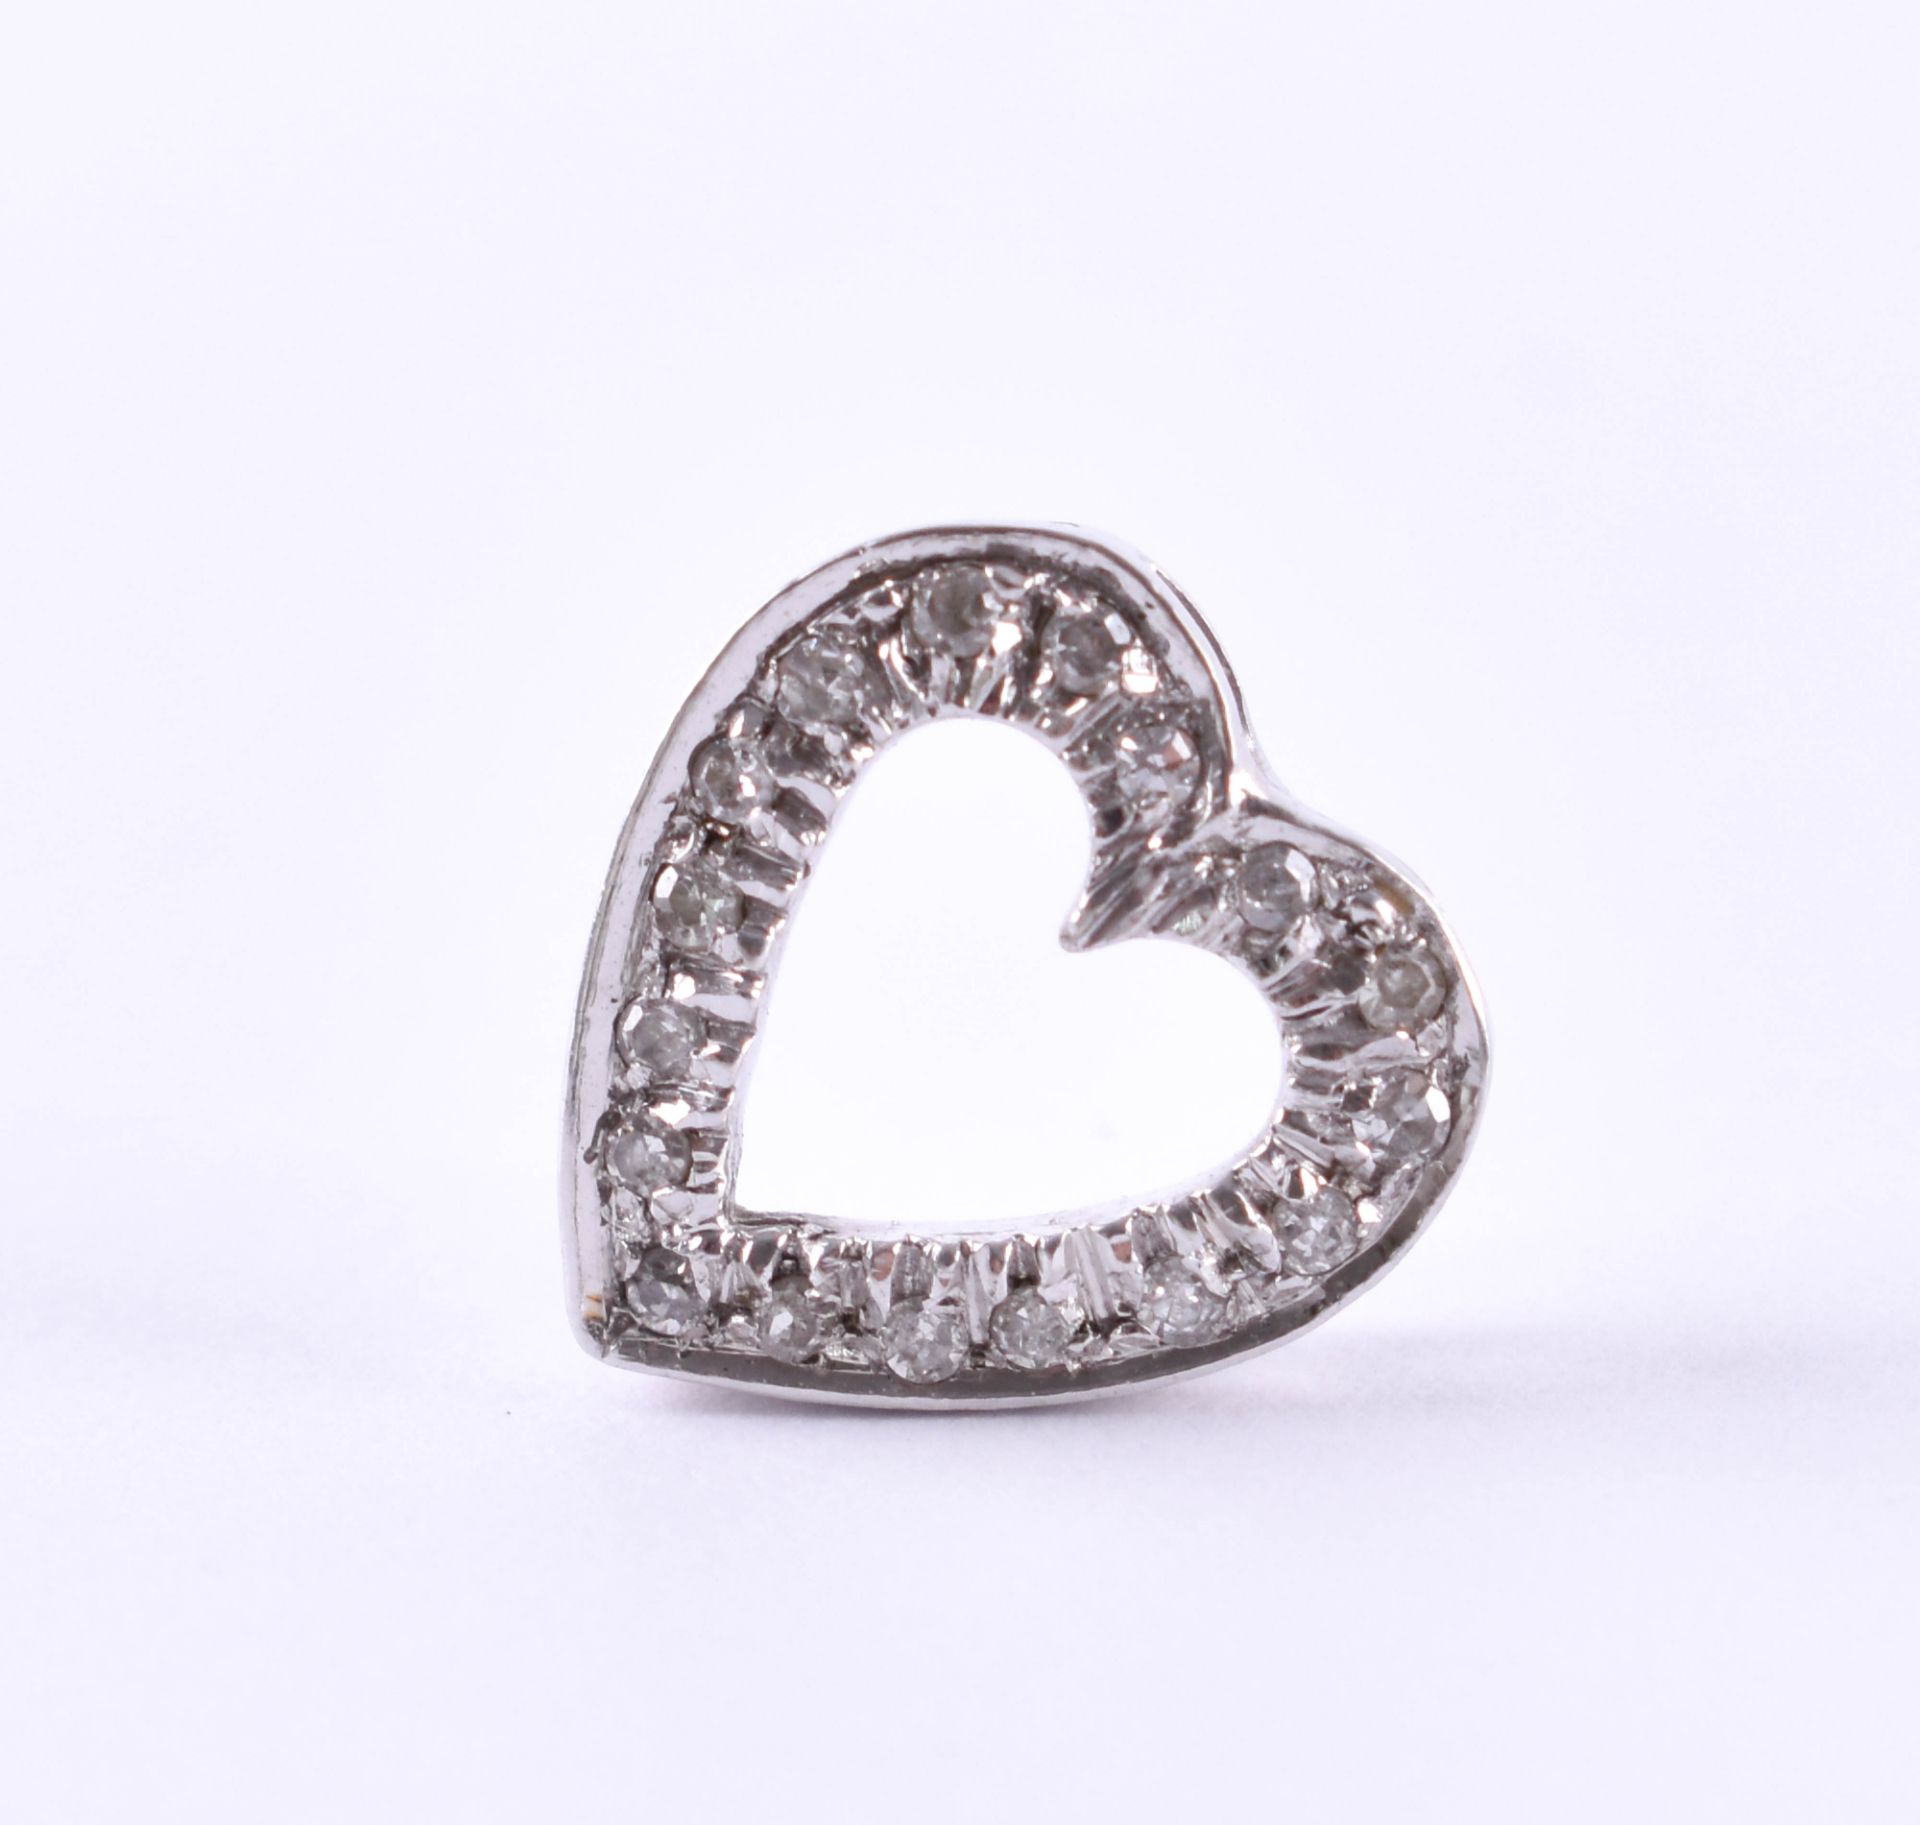 Heart shaped pendant750 white gold with diamonds, gold proofed, weight: 2.3 gAnhänger in Herzform750